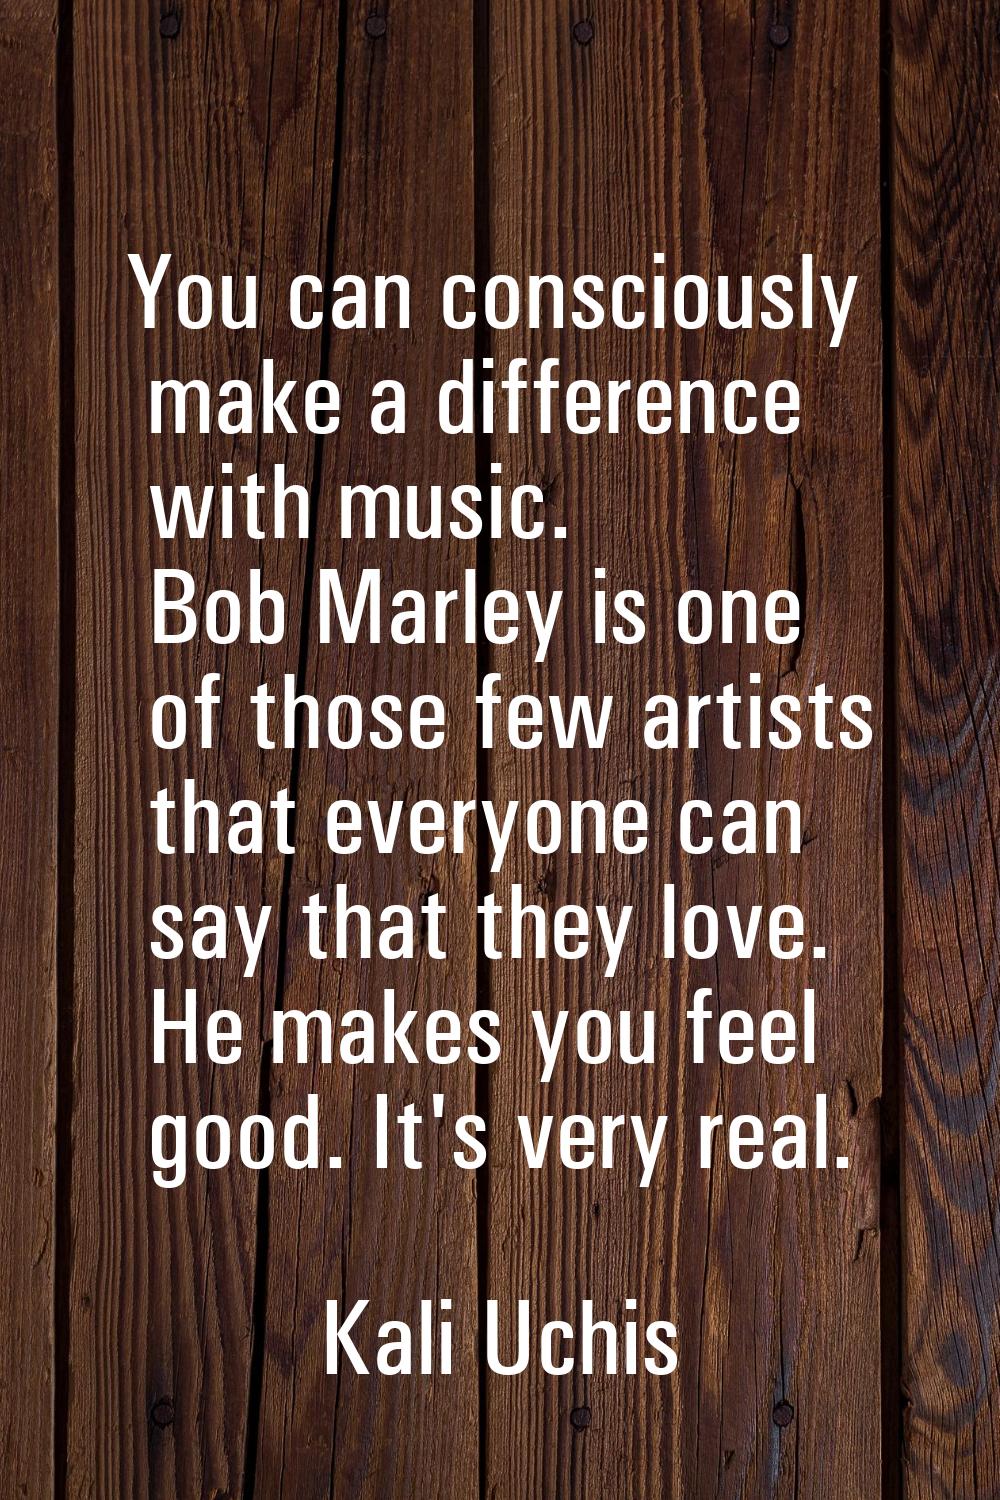 You can consciously make a difference with music. Bob Marley is one of those few artists that every